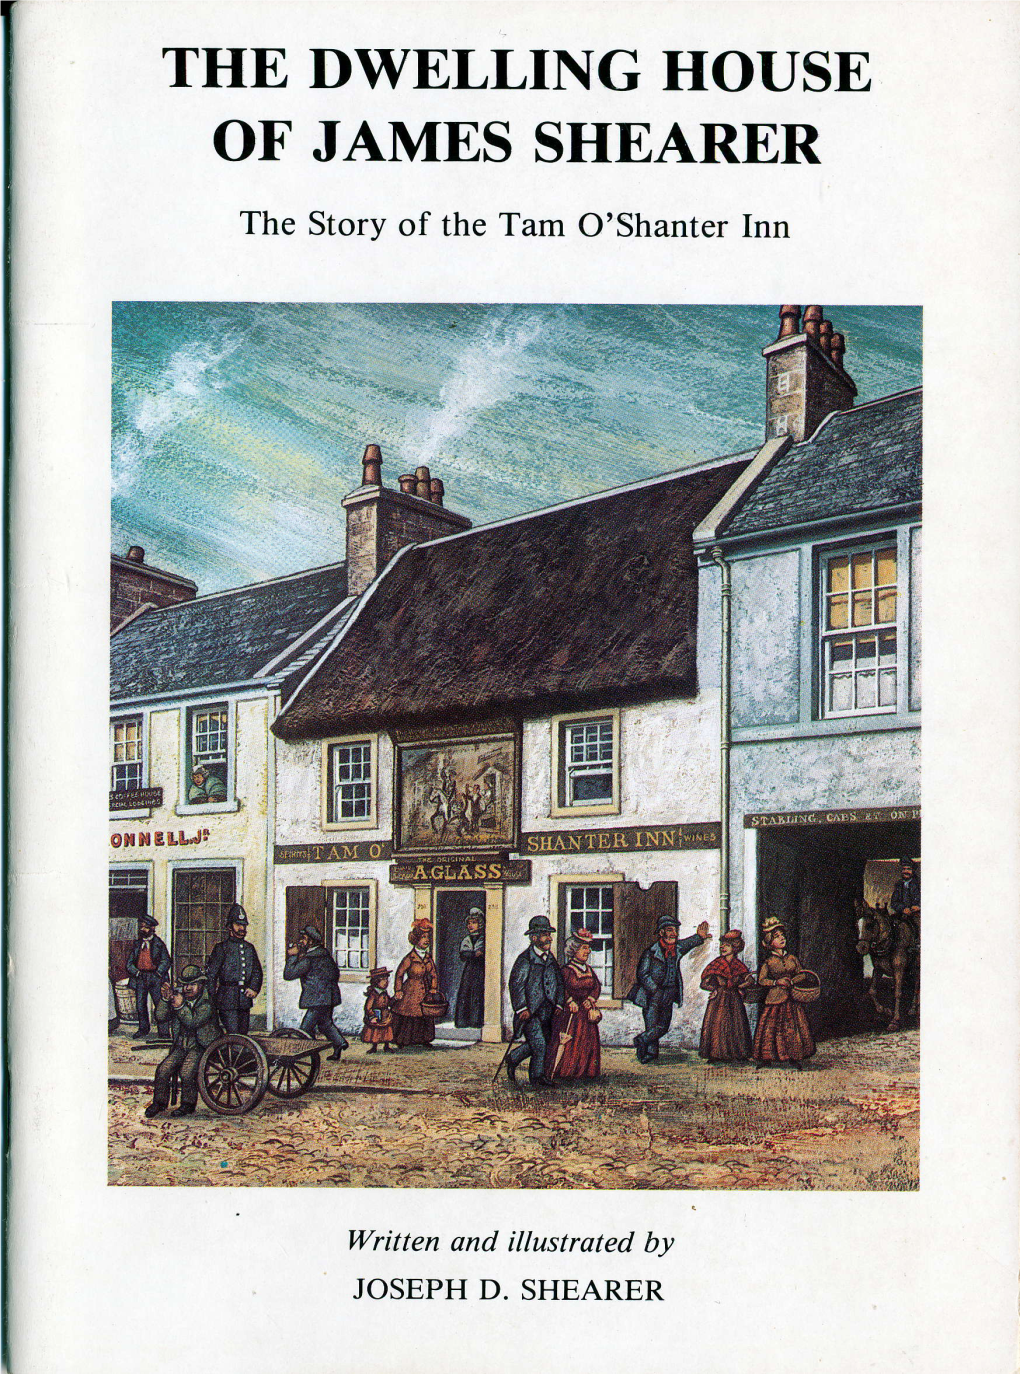 The Dwelling House of James Shearer